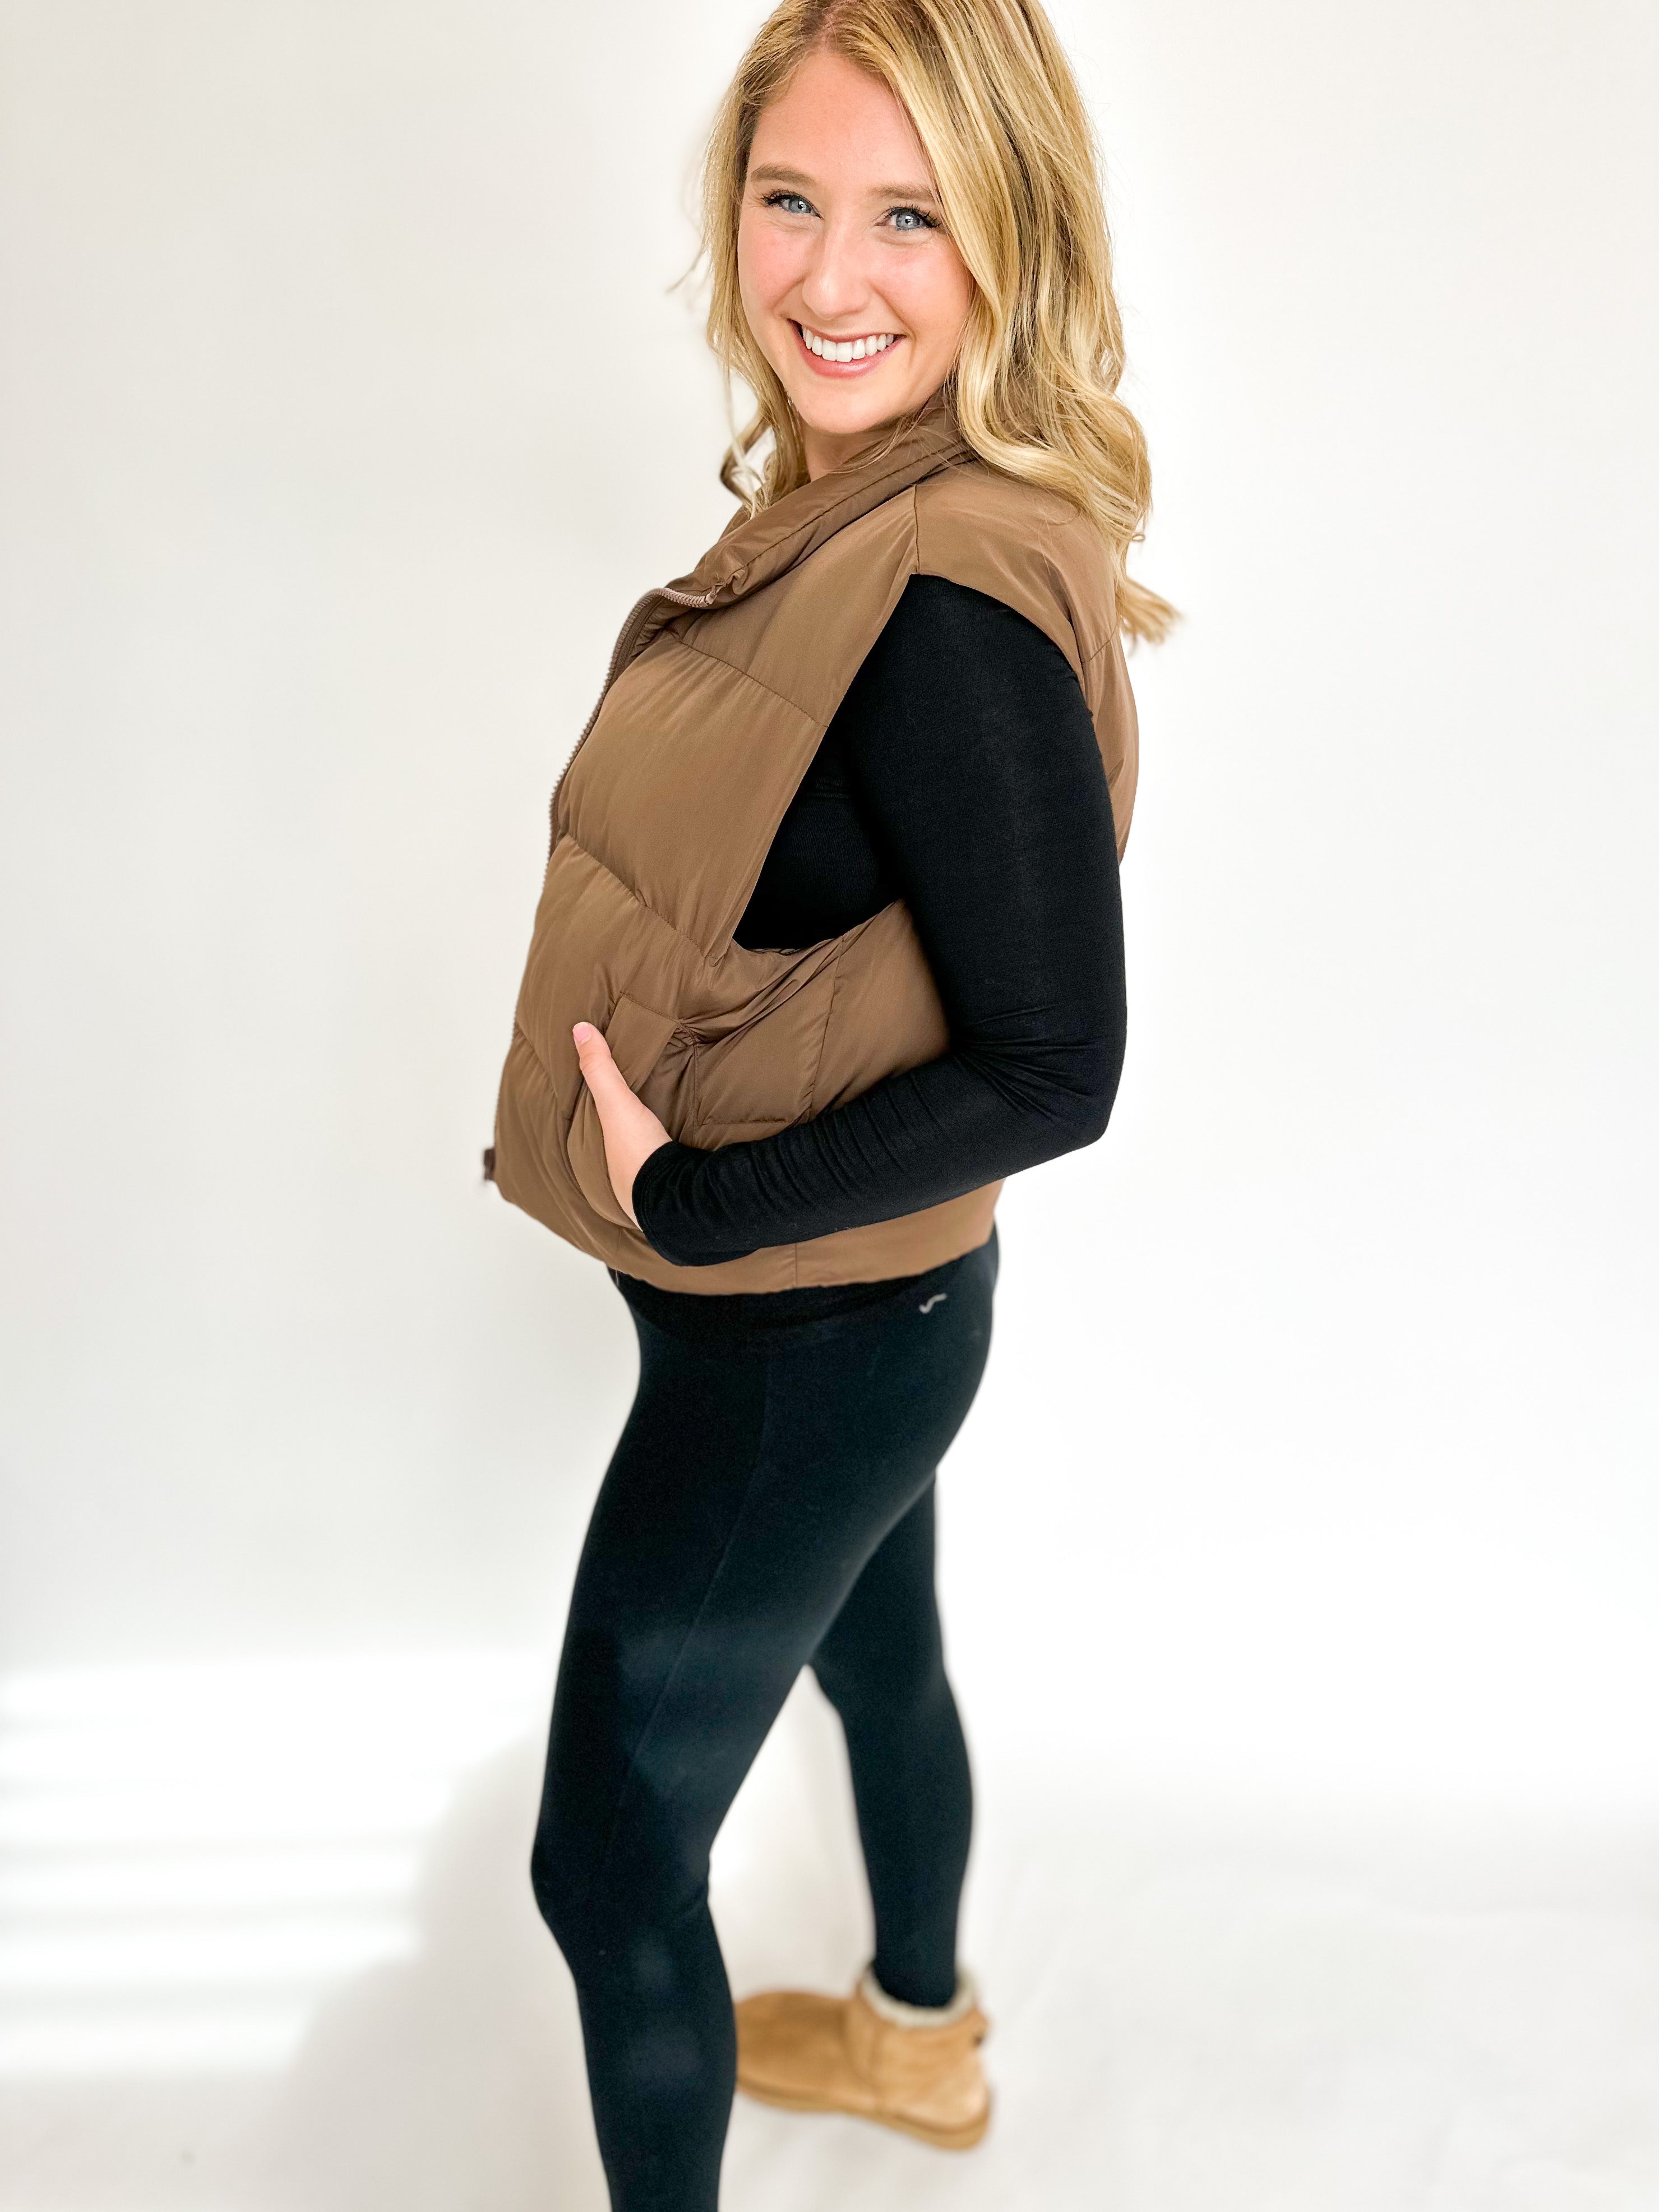 Lightweight Chic Puffer Vest- Coco-600 Outerwear-ENTRO-July & June Women's Fashion Boutique Located in San Antonio, Texas